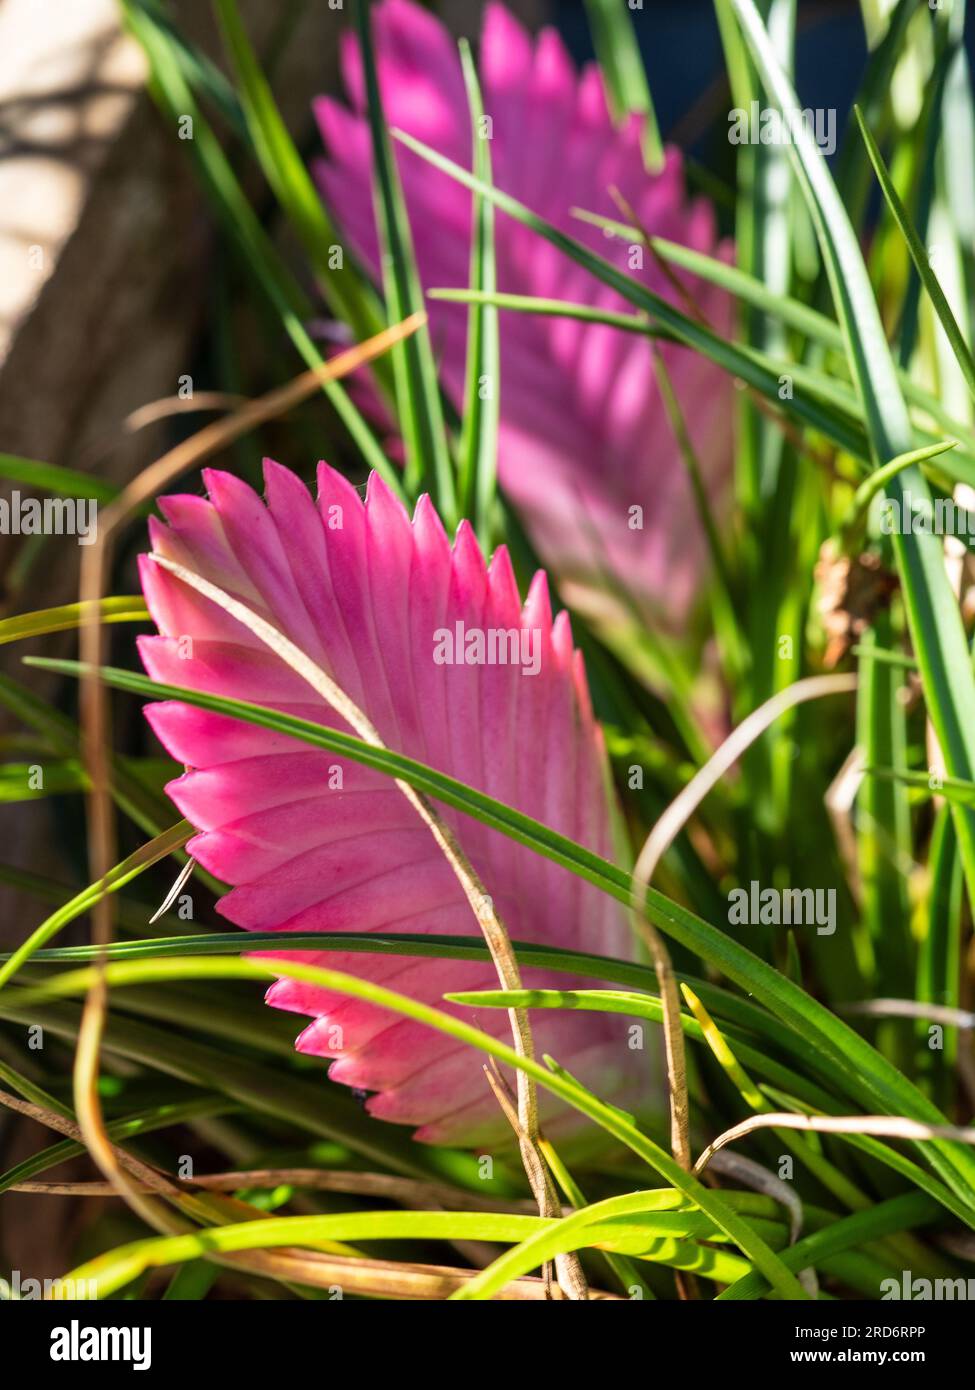 Pink Quill plant bracts Stock Photo